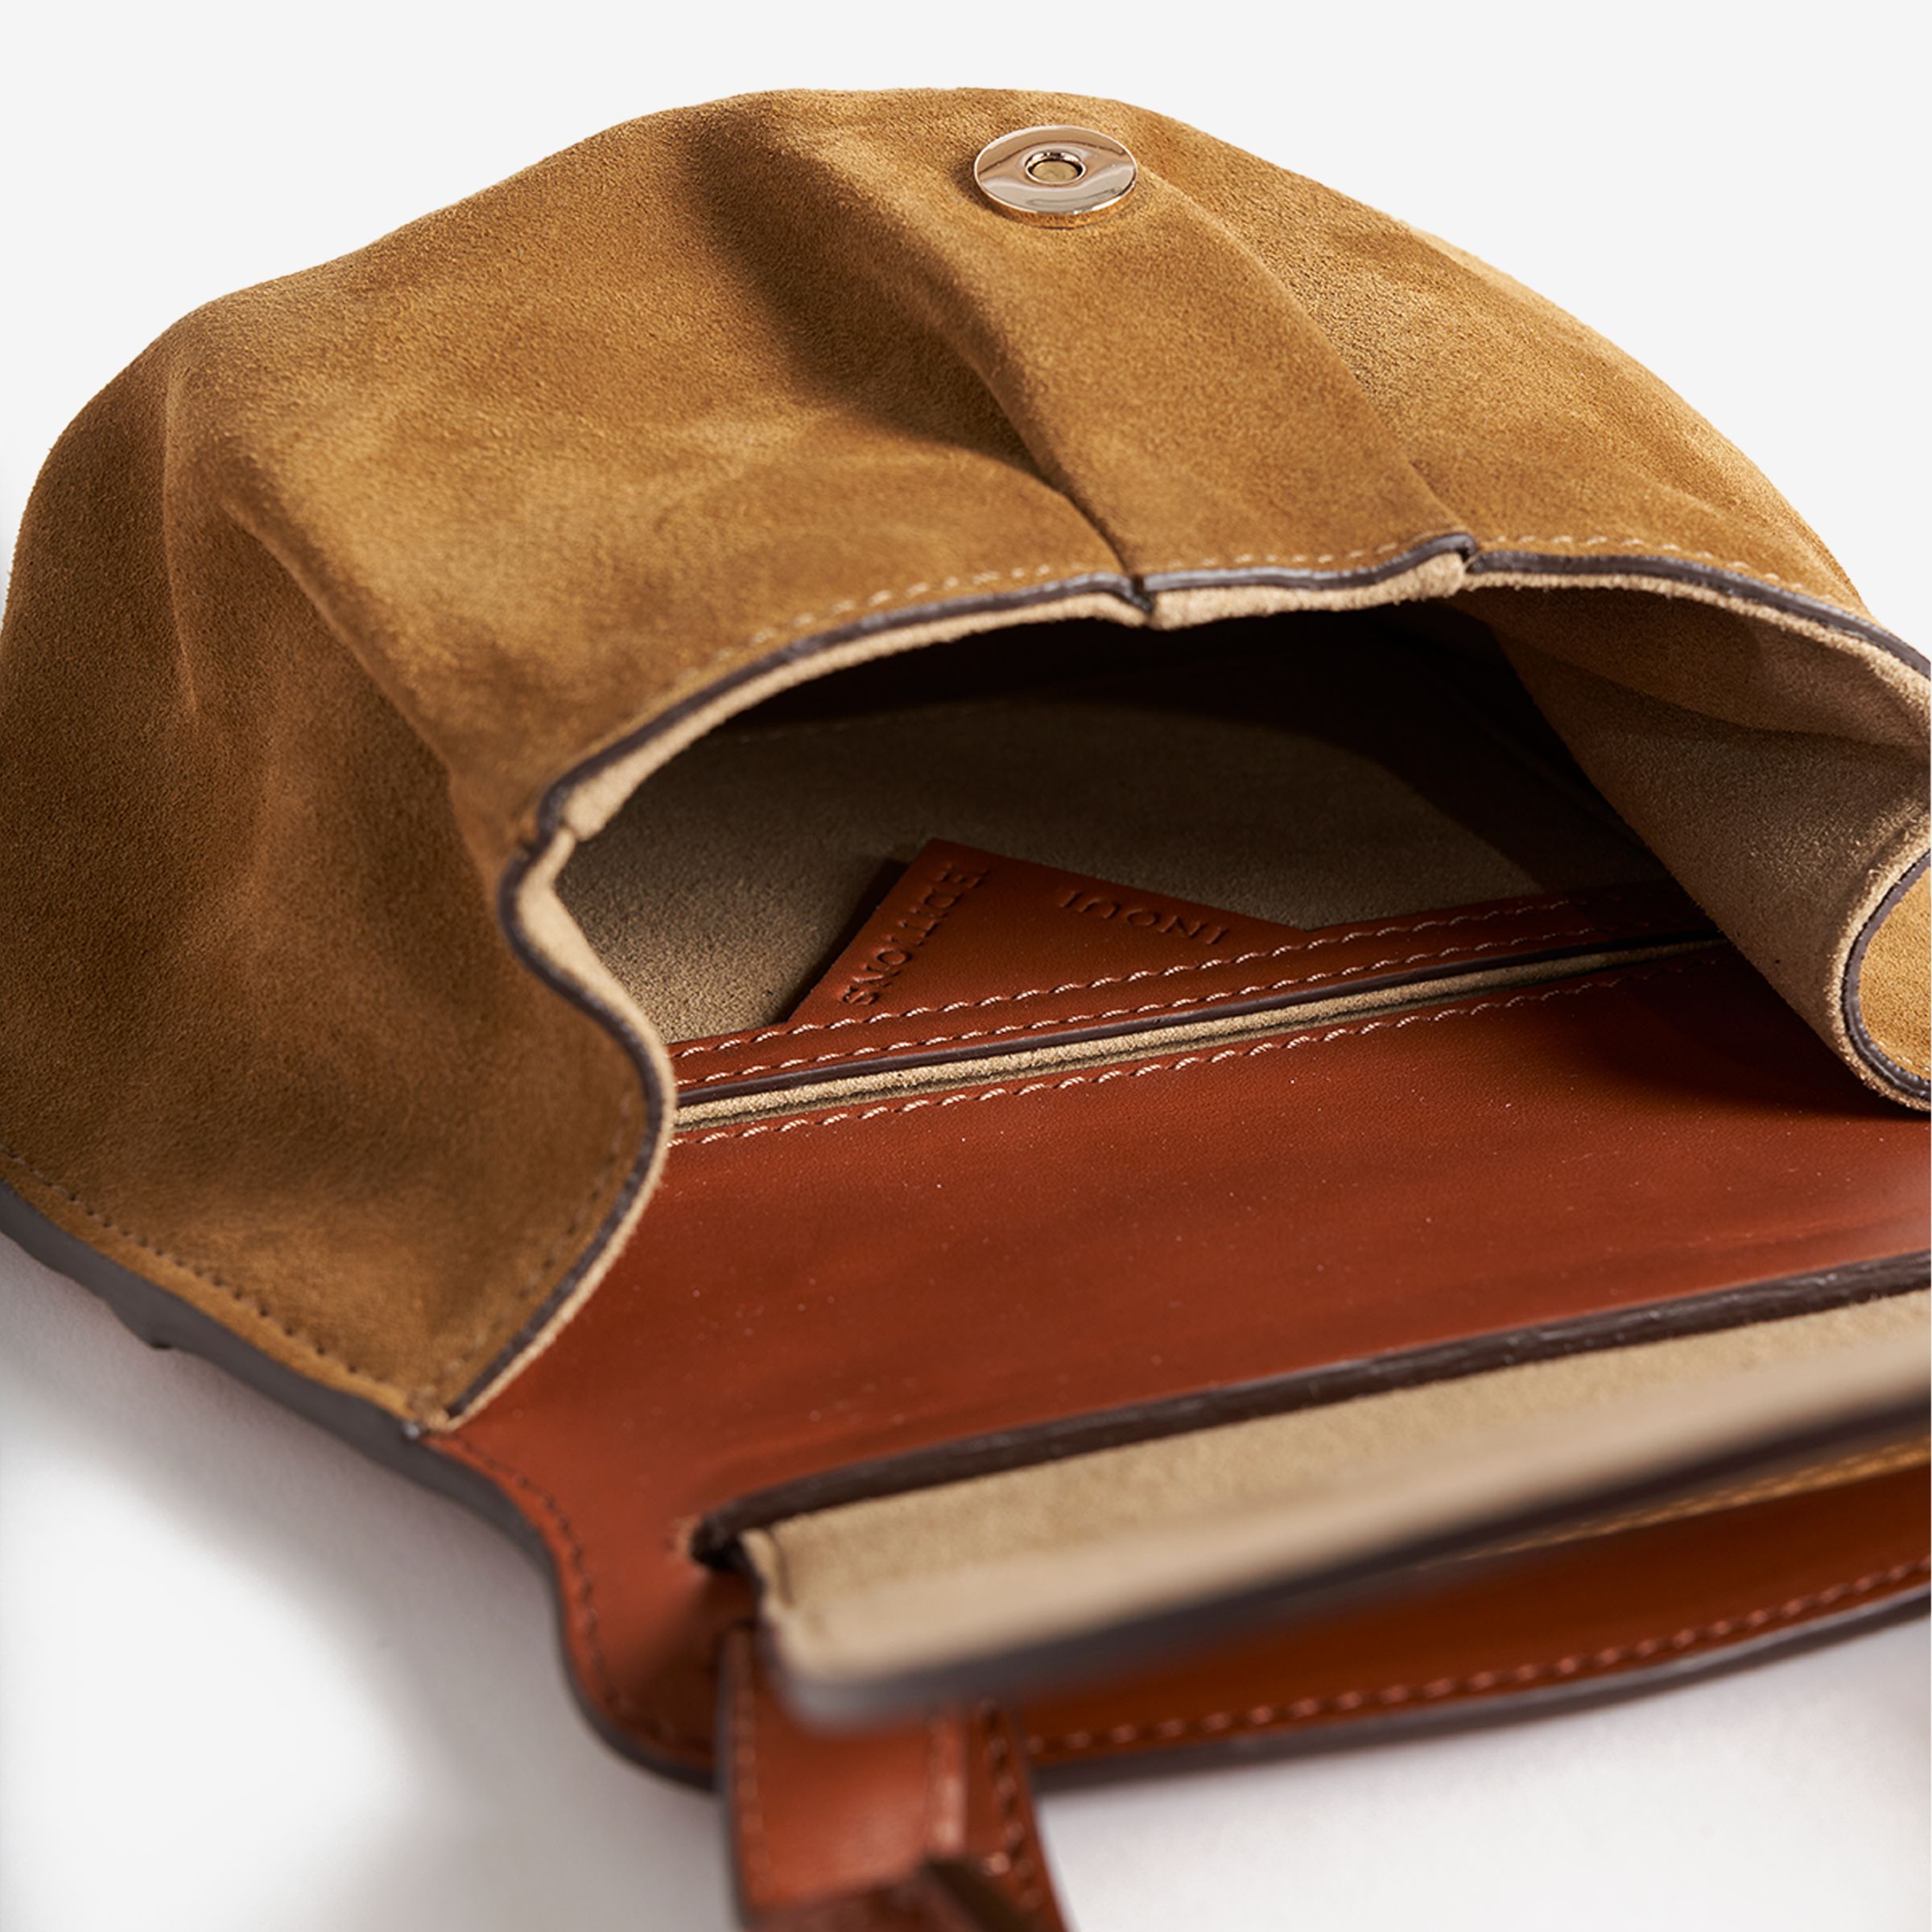 Shell Bag - Suede - Brown